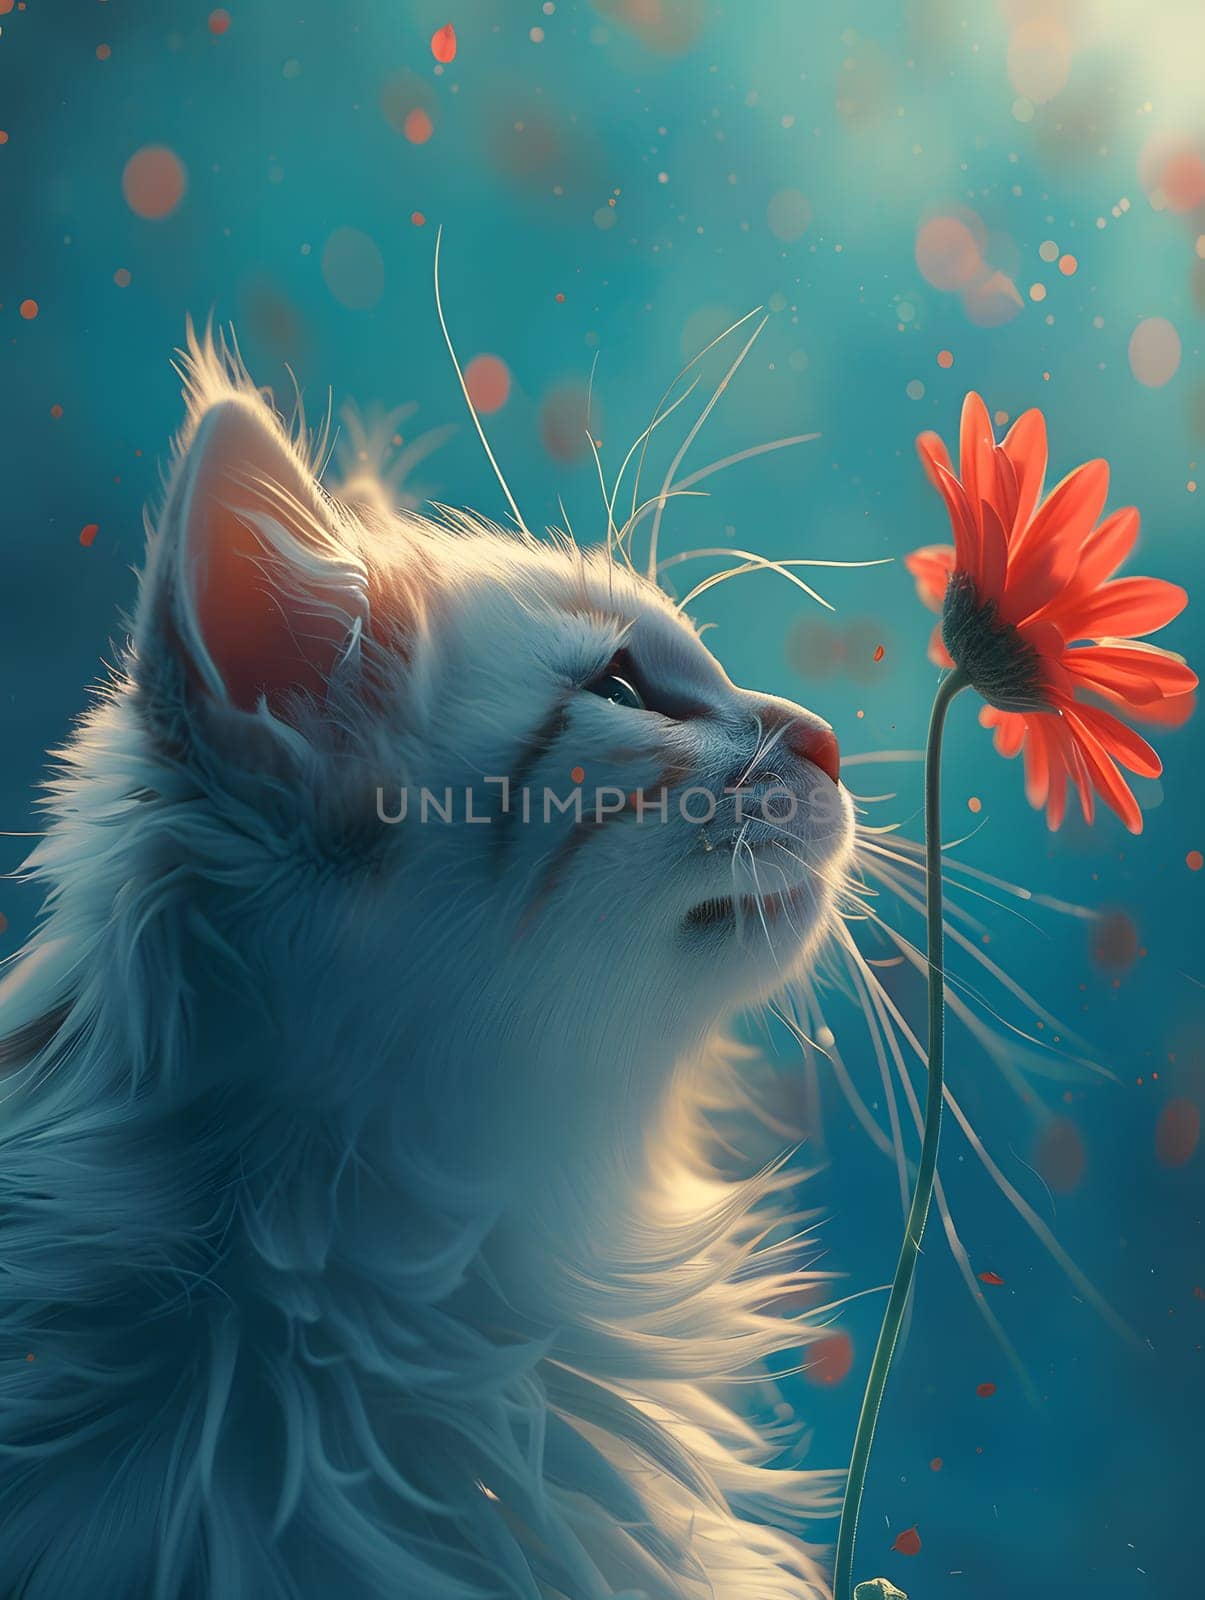 A Felidae organism, with whiskers, a small to mediumsized cat, is sniffing a red plant by the window. Its fluffy white fur contrasts with the azure sky outside